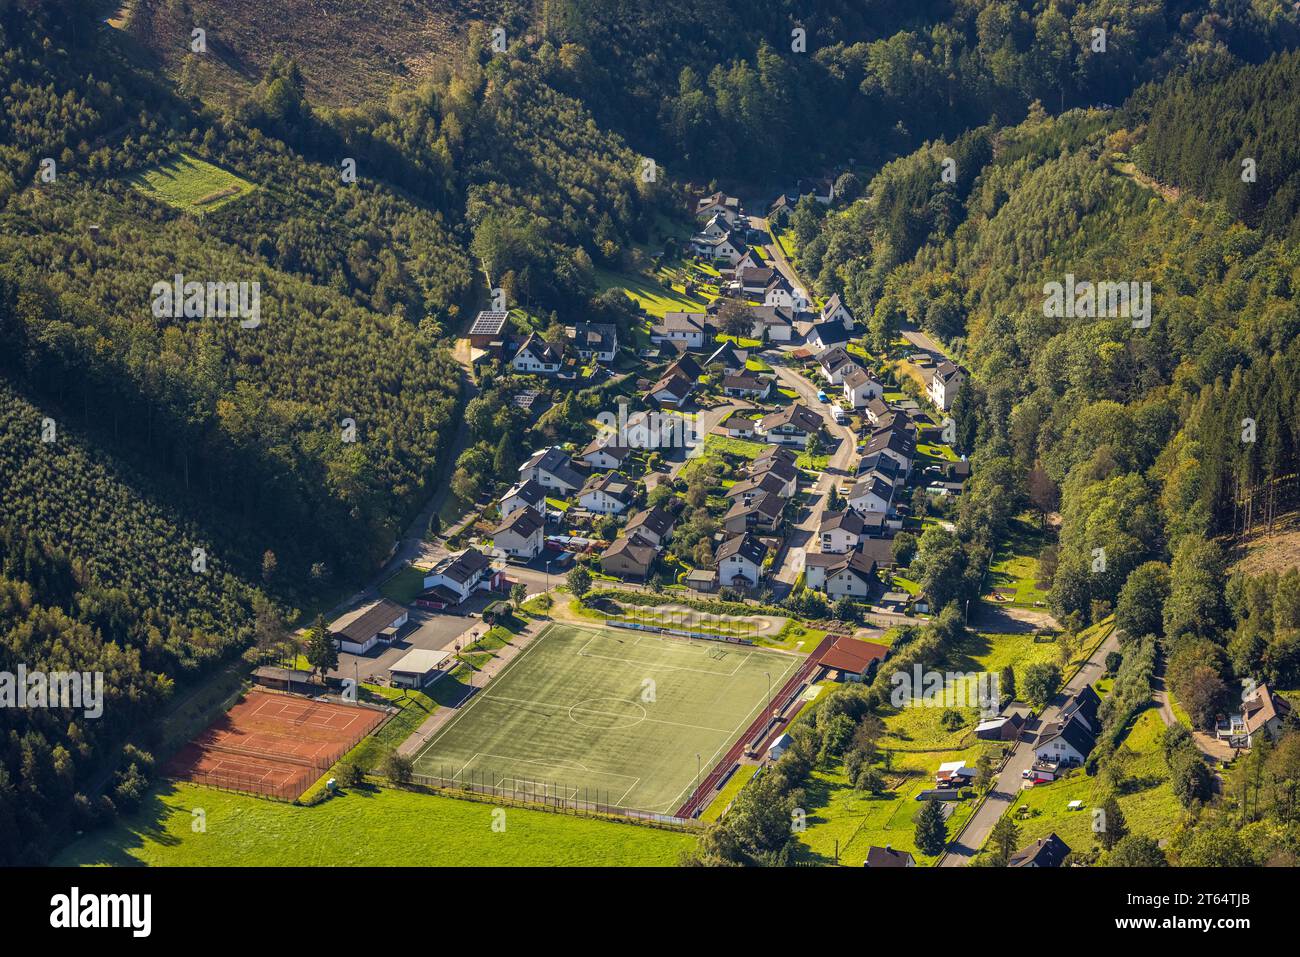 Aerial view, residential area Glingestraße and sports field, hilly landscape and wooded area, Rönkhausen, Finnentrop, Sauerland, North Rhine-Westphali Stock Photo